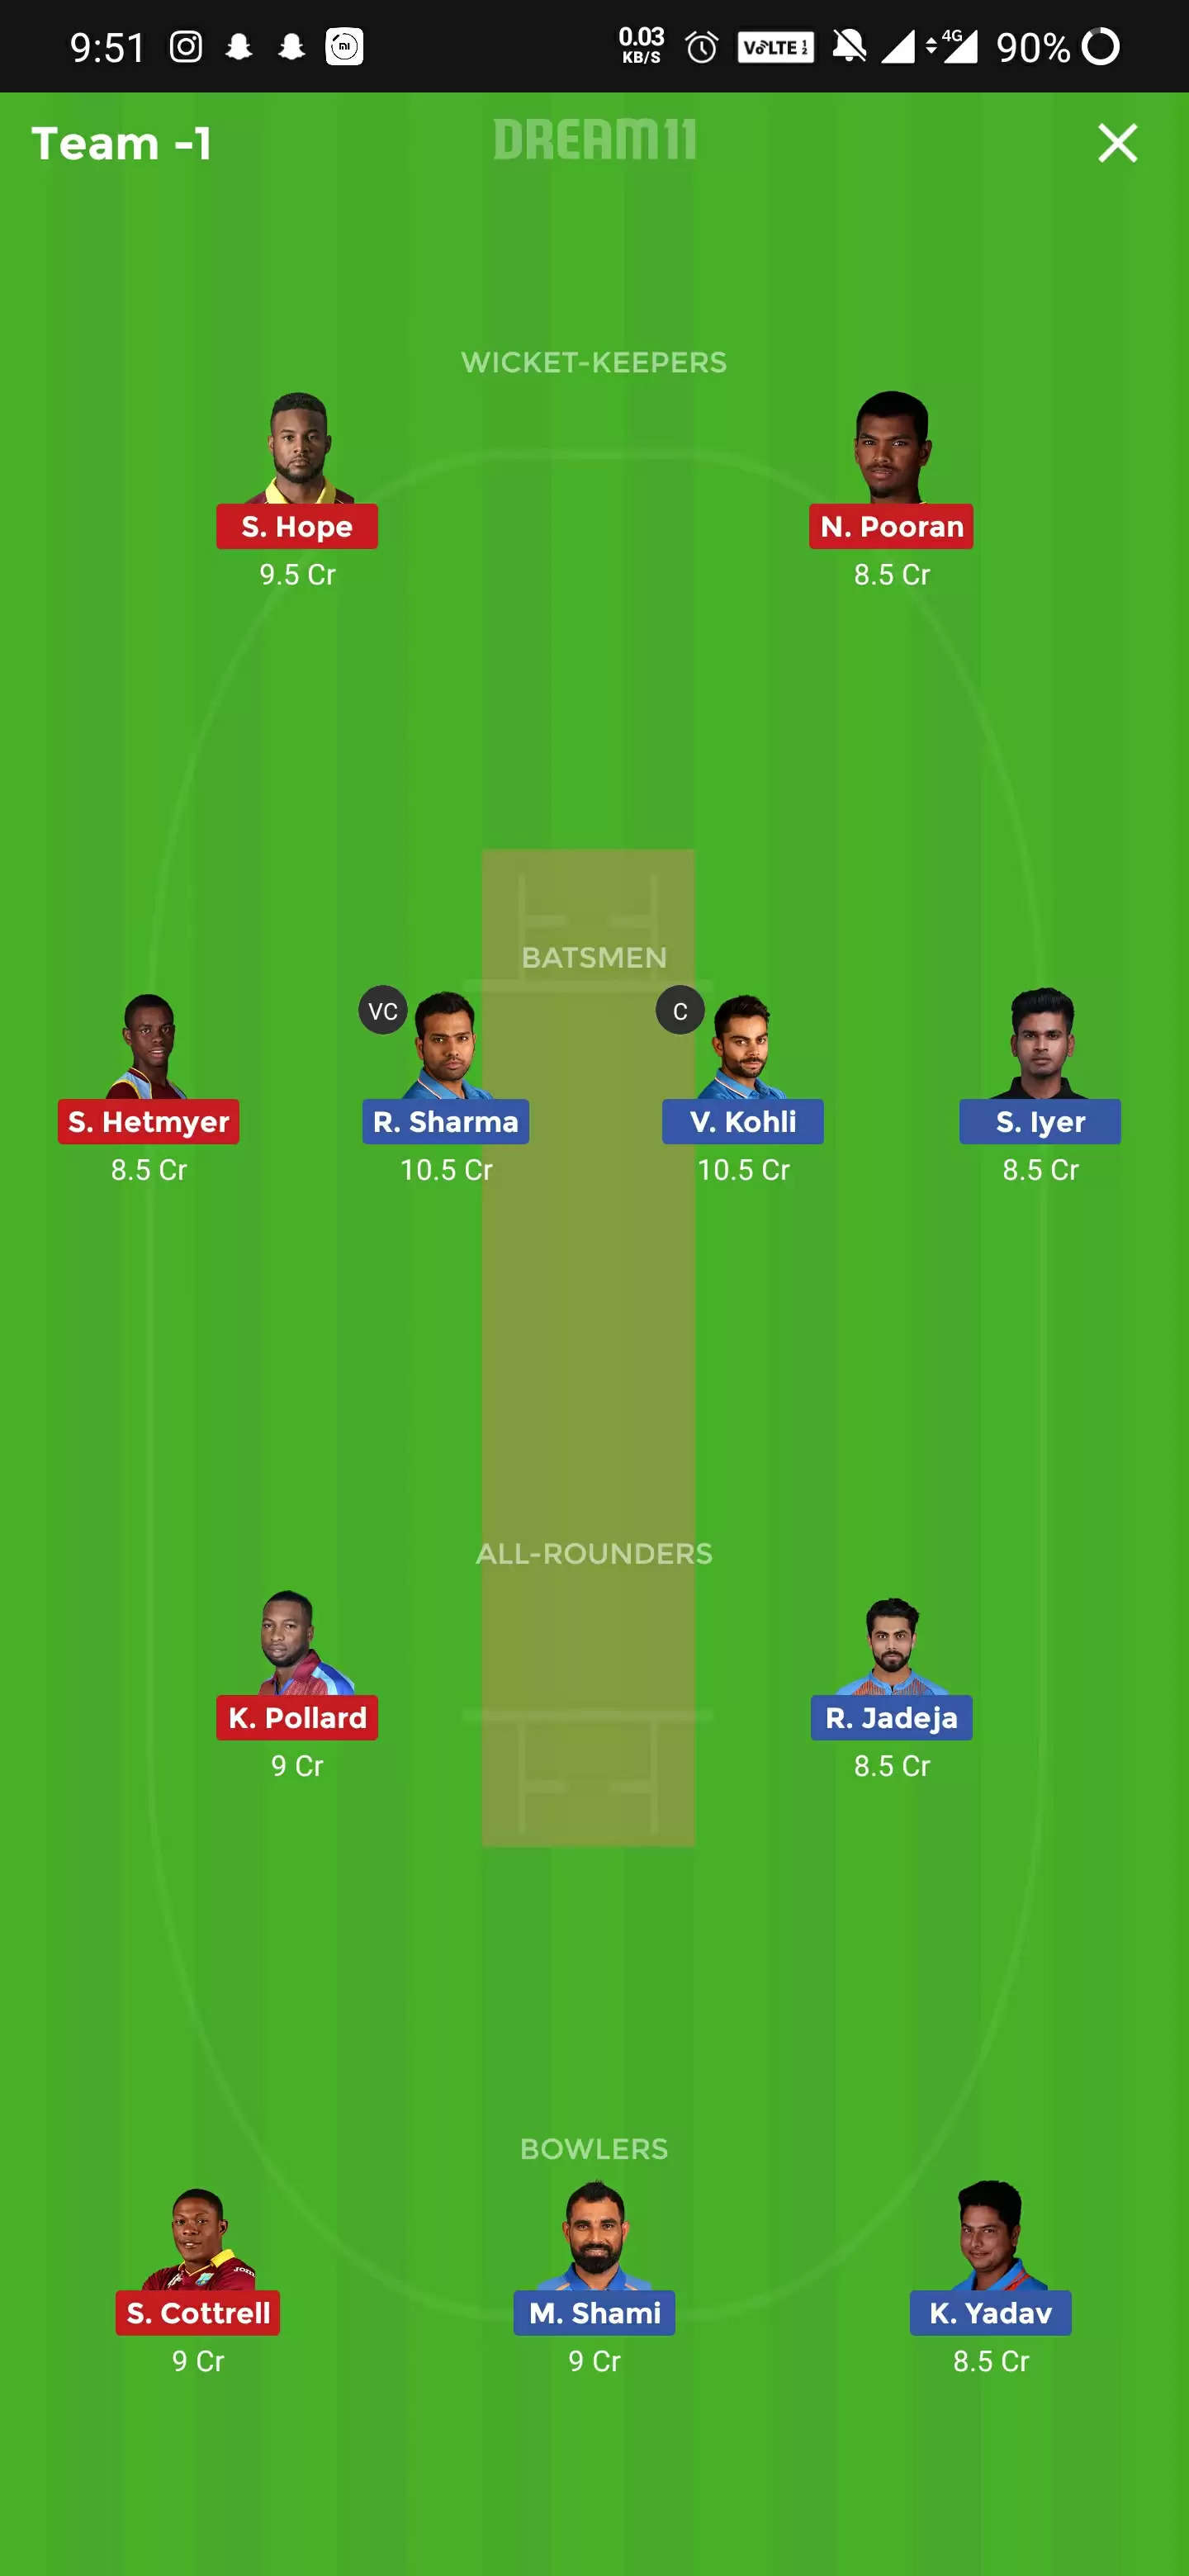 IND vs WI, 1st ODI Dream11 Fantasy Cricket Prediction, Preview, Tips, Playing XI, Weather and Pitch Conditions